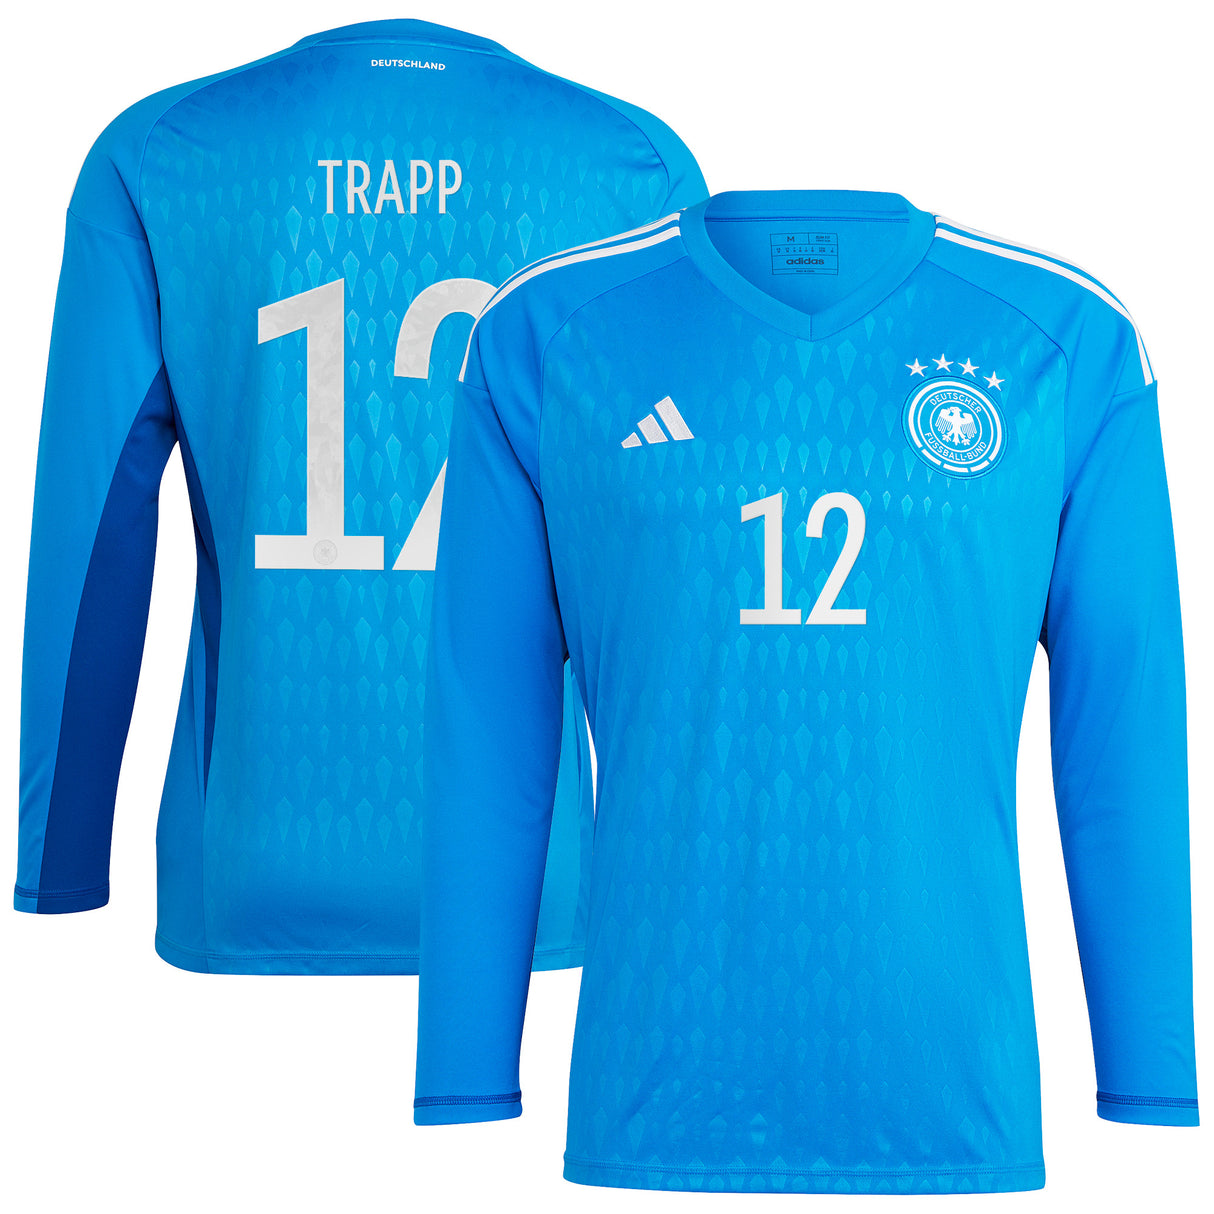 DFB Goalkeeper Shirt - Long Sleeve with Trapp 12 printing - Kit Captain